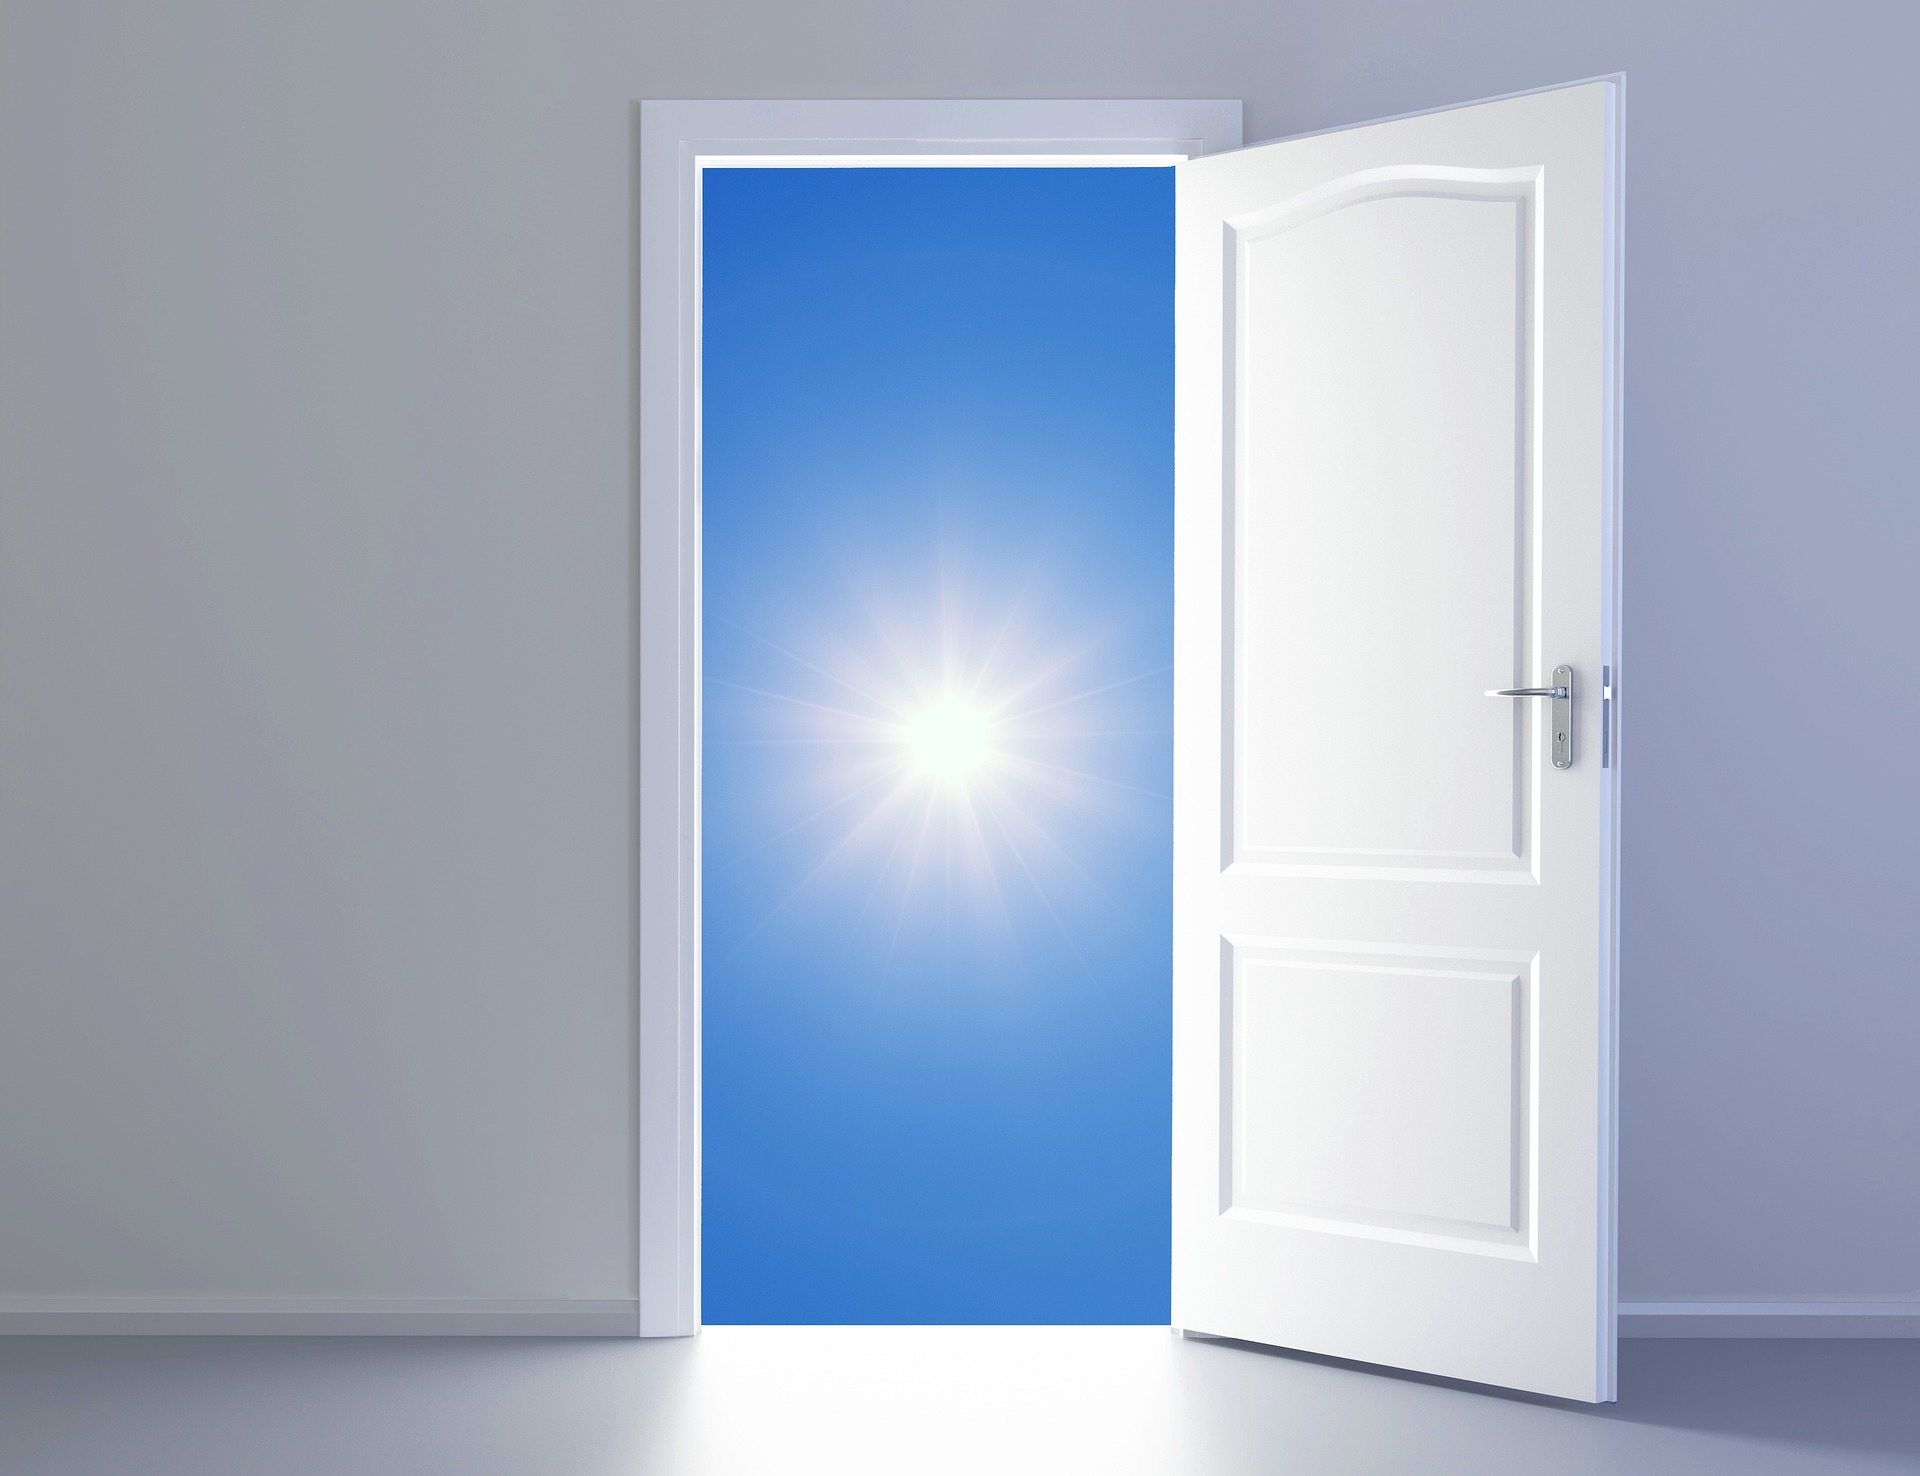 open-door policy as a leader providing opportunities for others